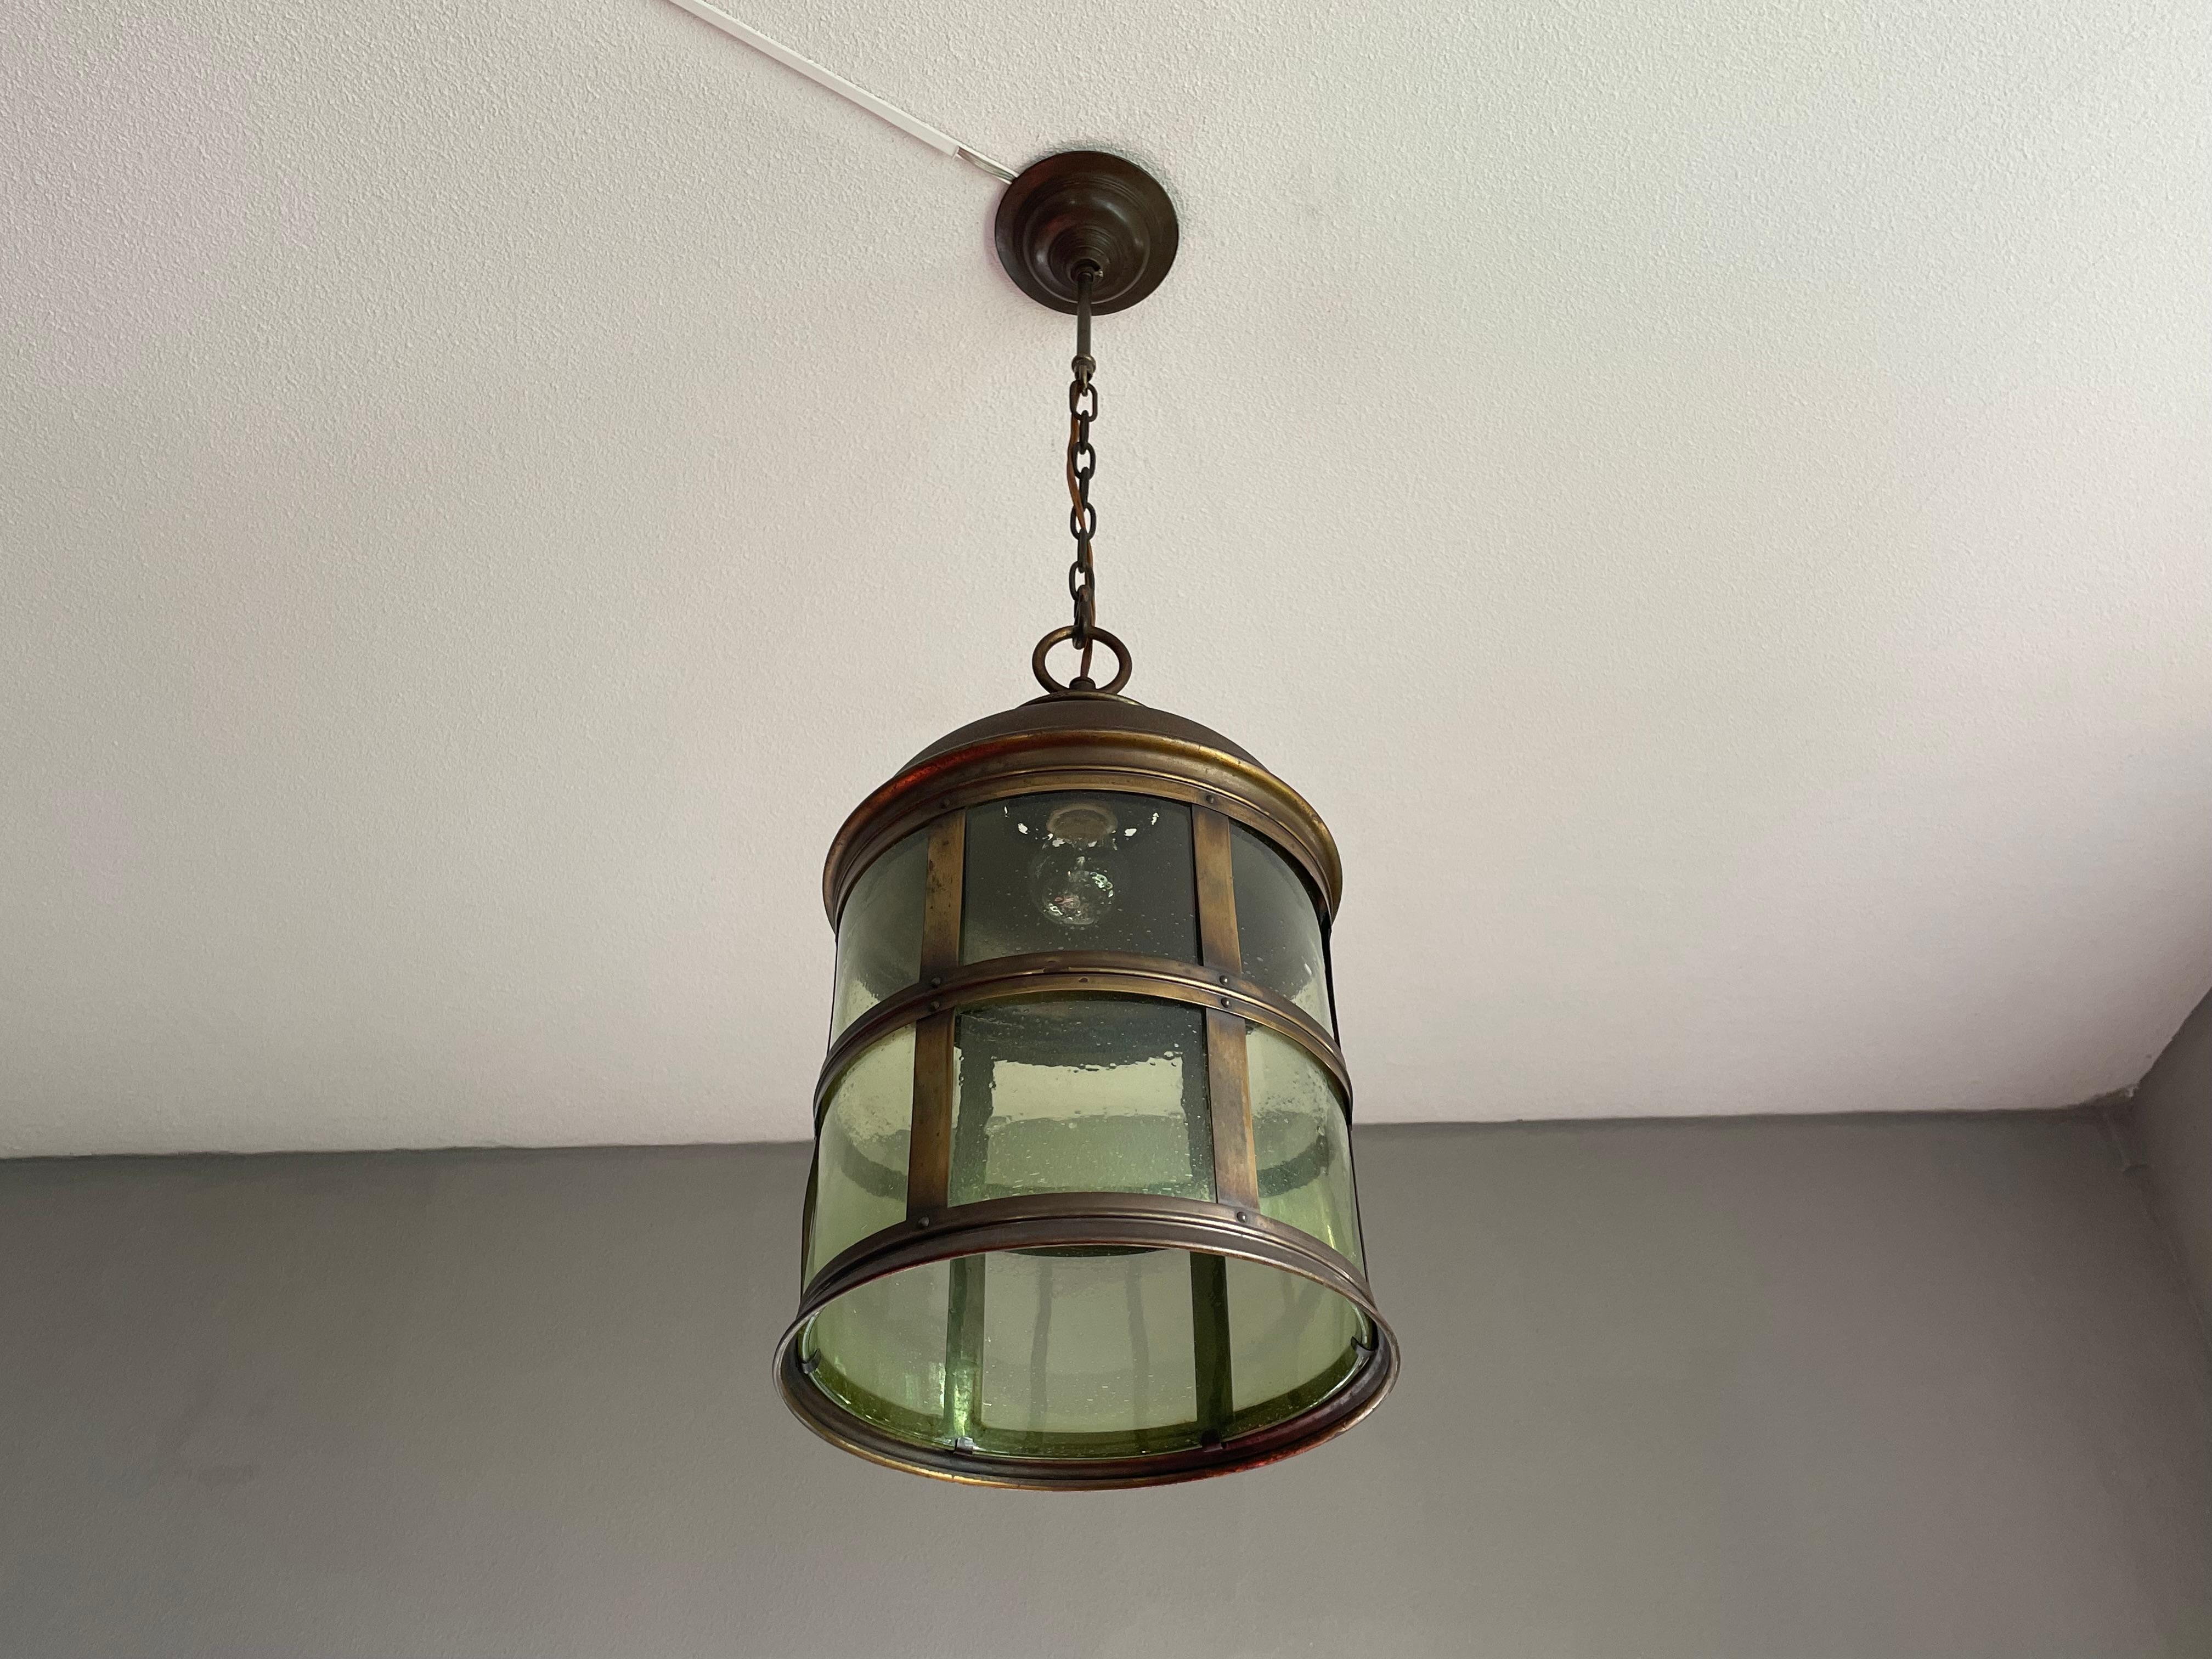 Larger than normal Arts and Crafts hallway pendant with unique art glass.

If you are looking for a stylish and quality crafted antique lantern to grace your entry hall, stairwell or landing then this Arts & Crafts beauty could be perfect for you.